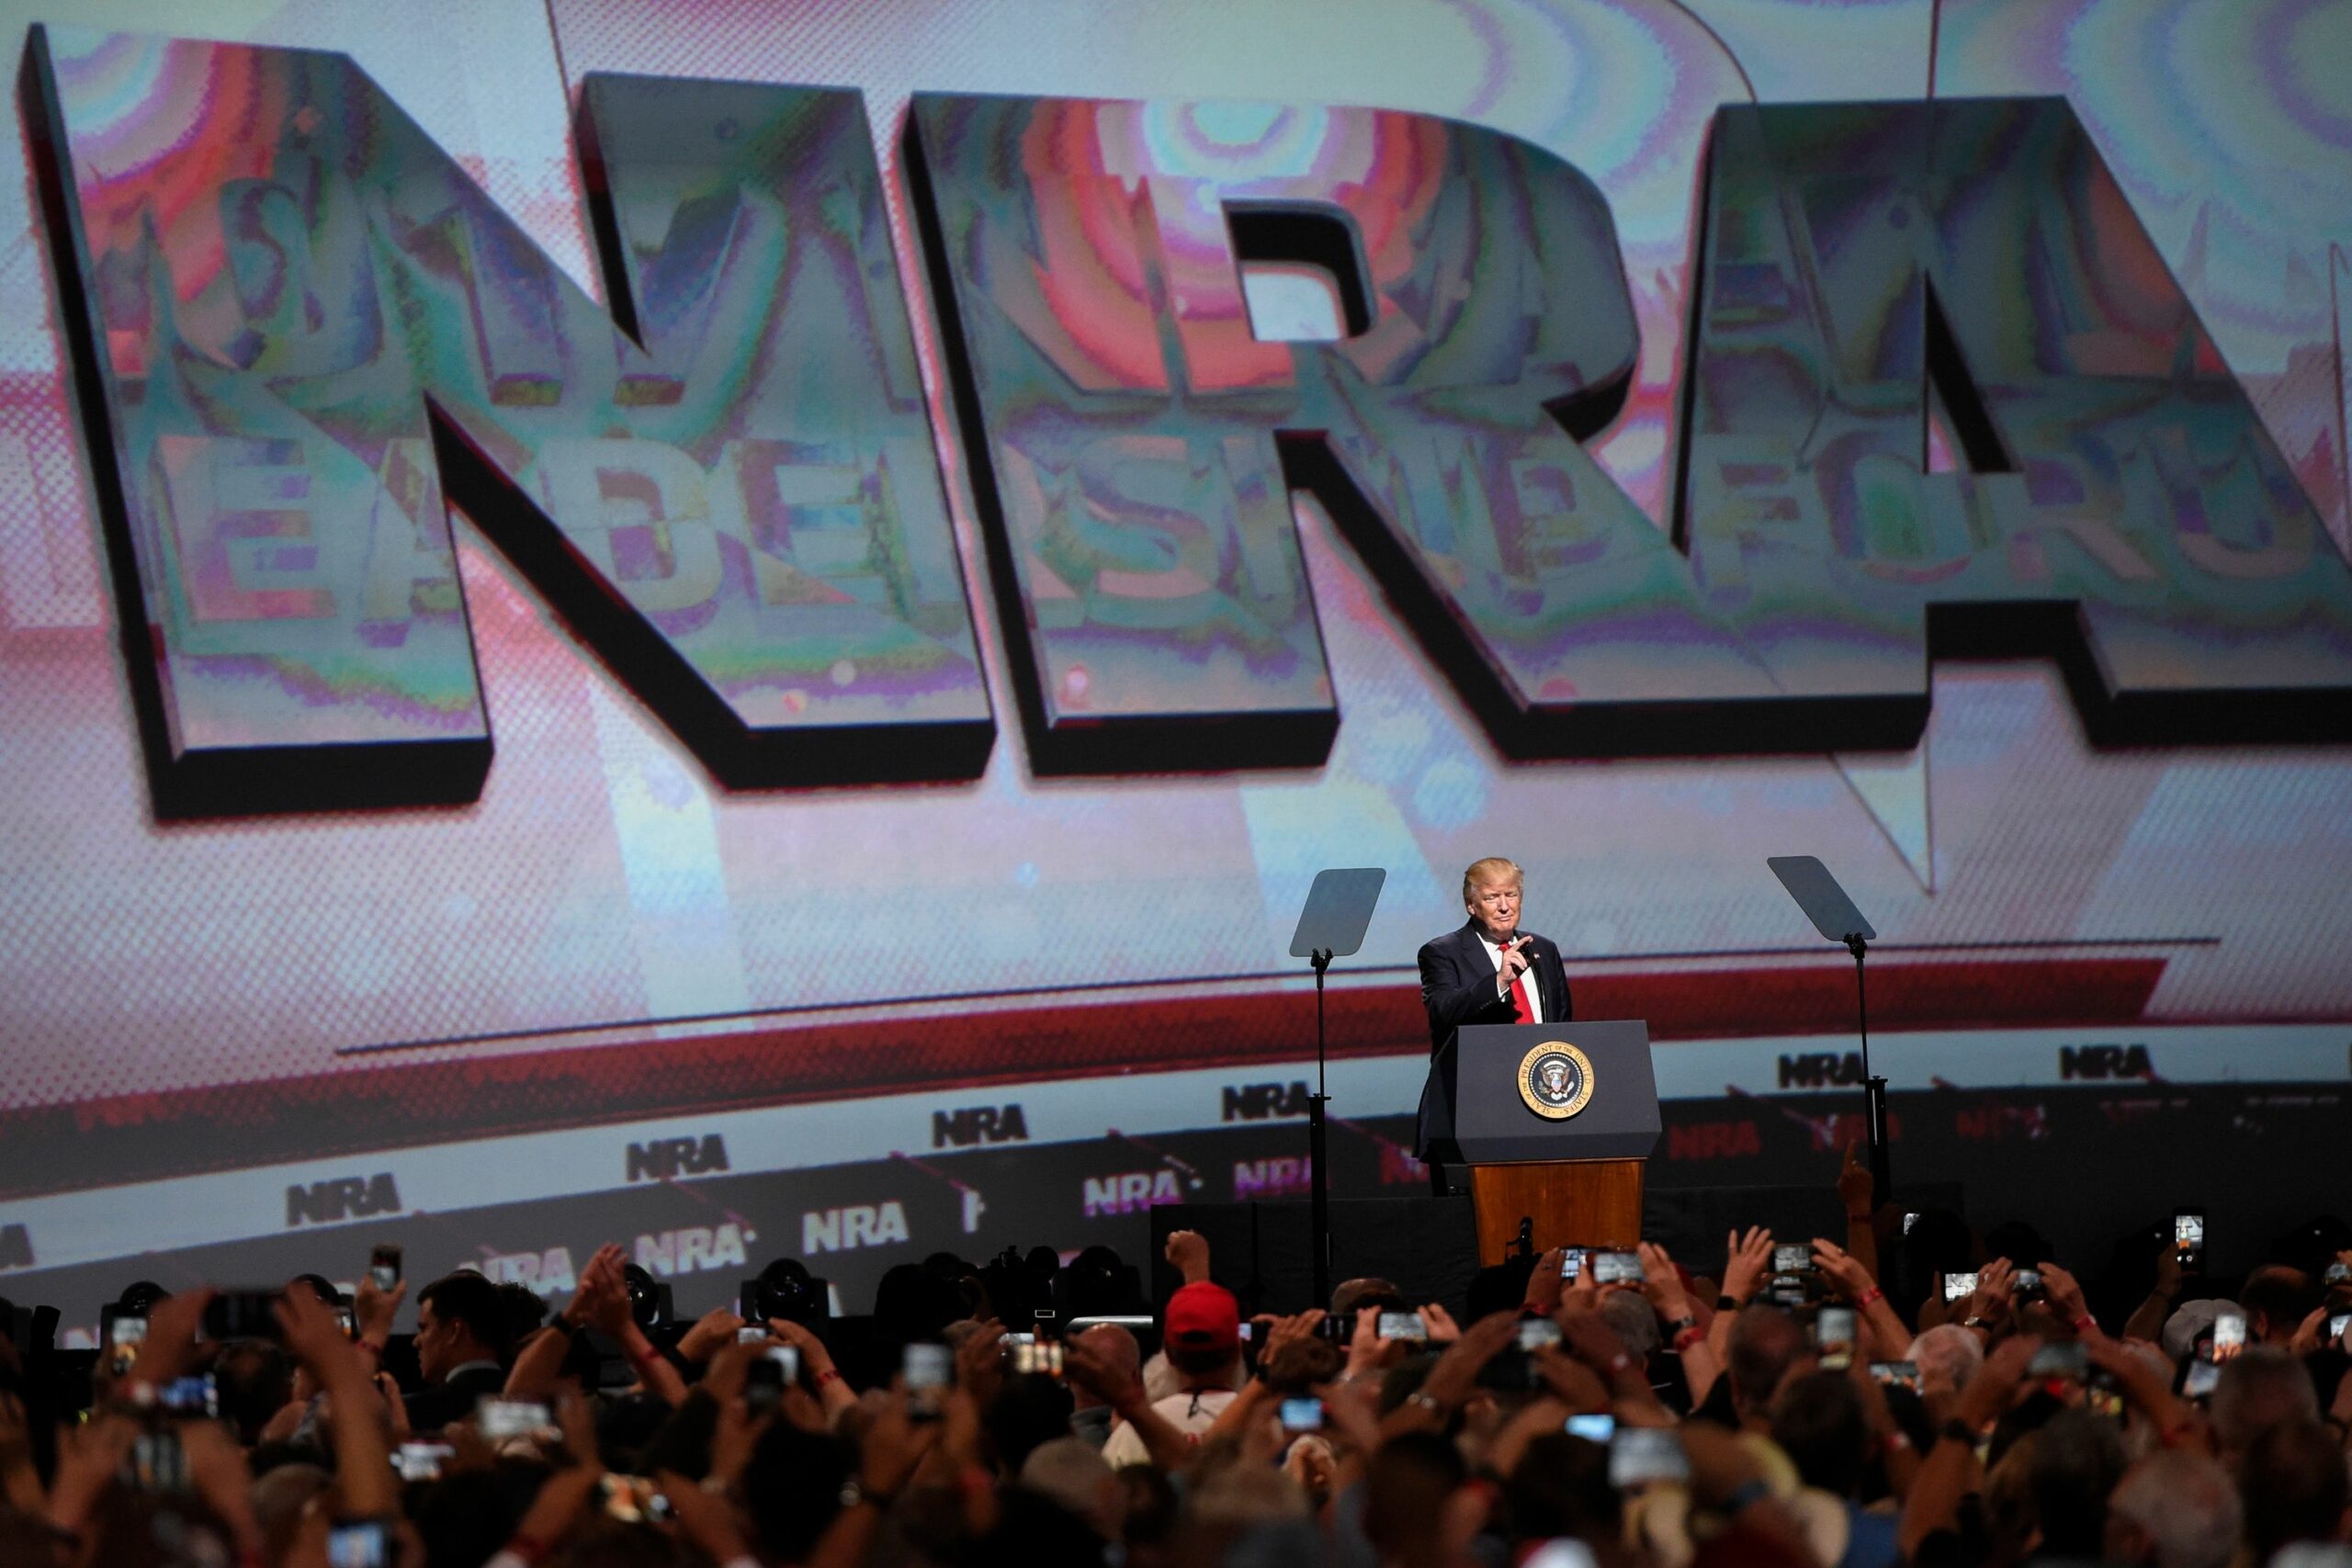 The Moment the NRA Decided to Embrace the Culture Wars